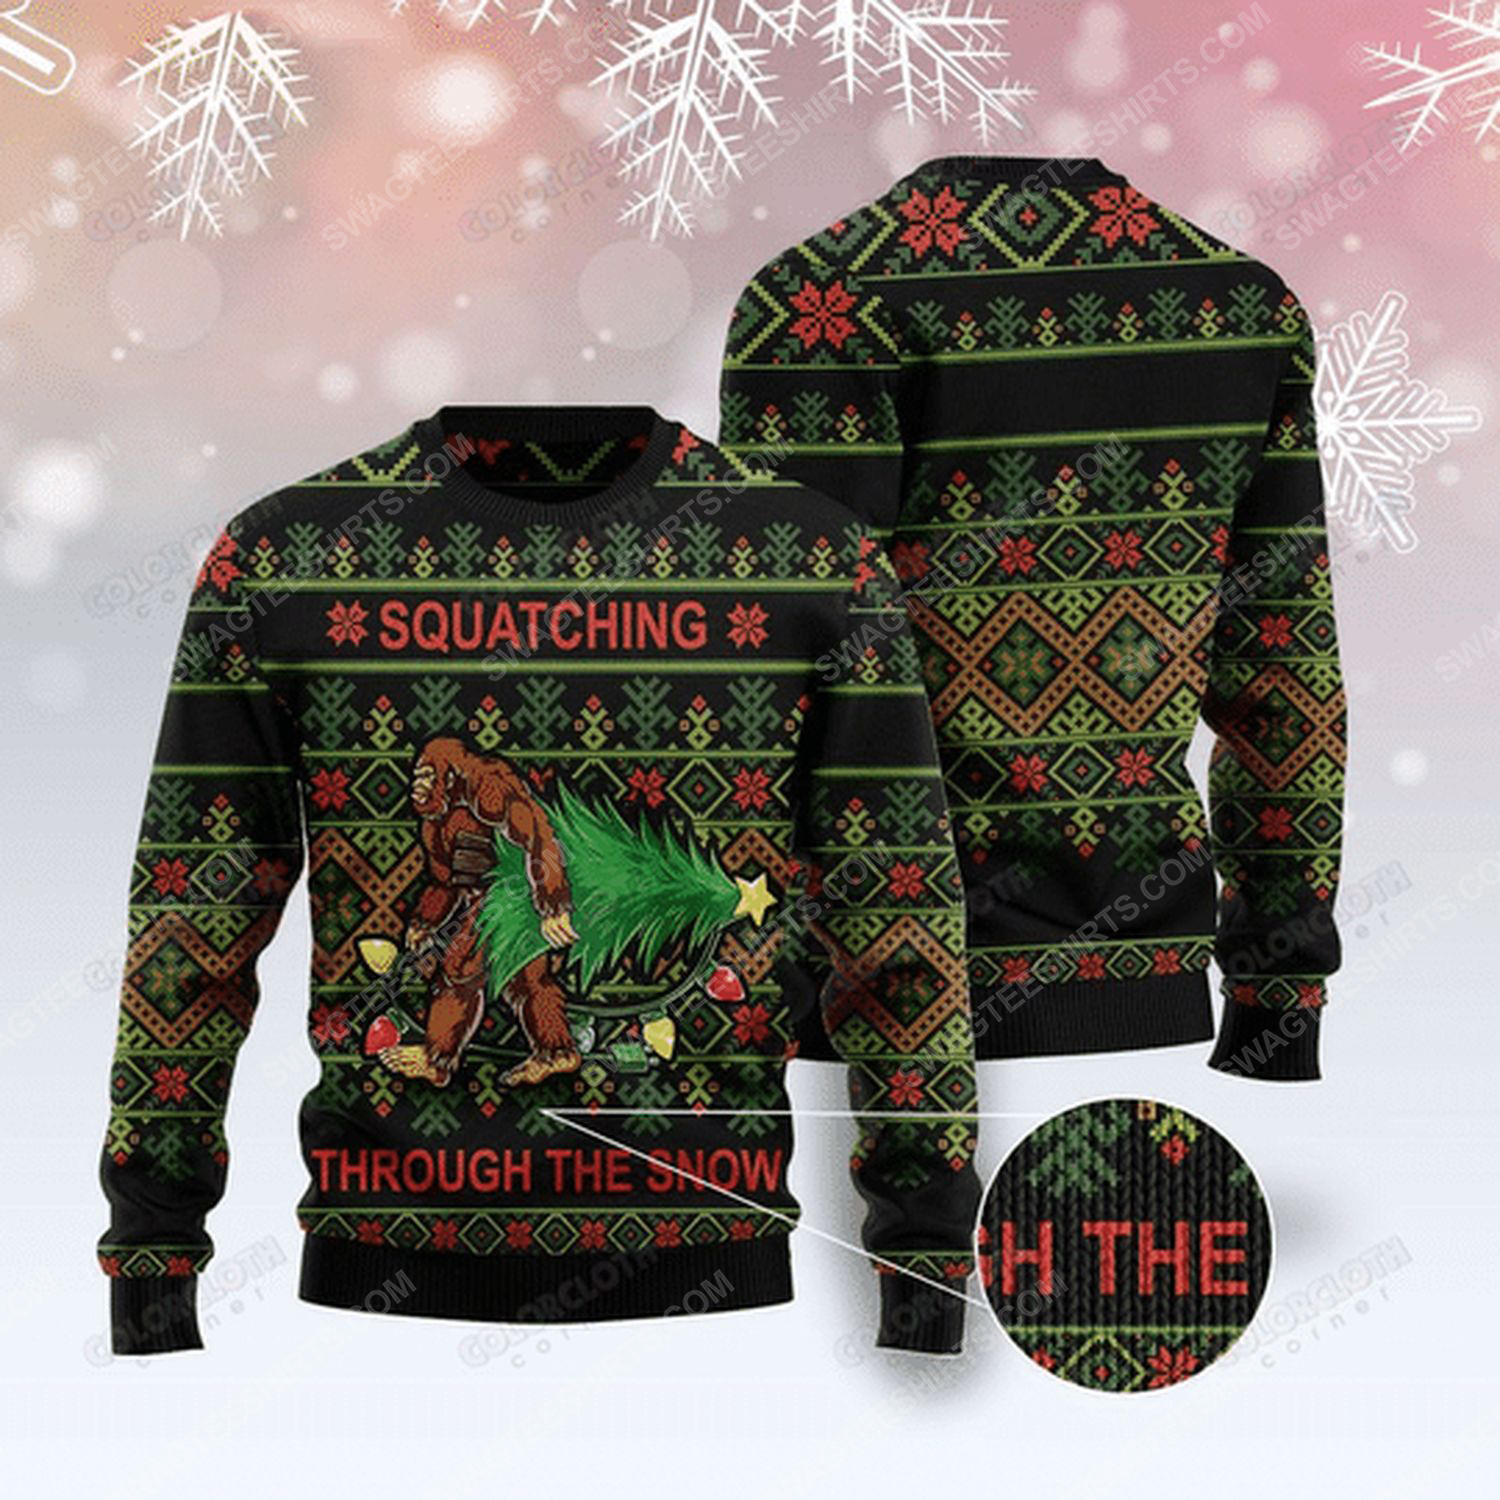 Bigfoot squatching through the snow ugly christmas sweater